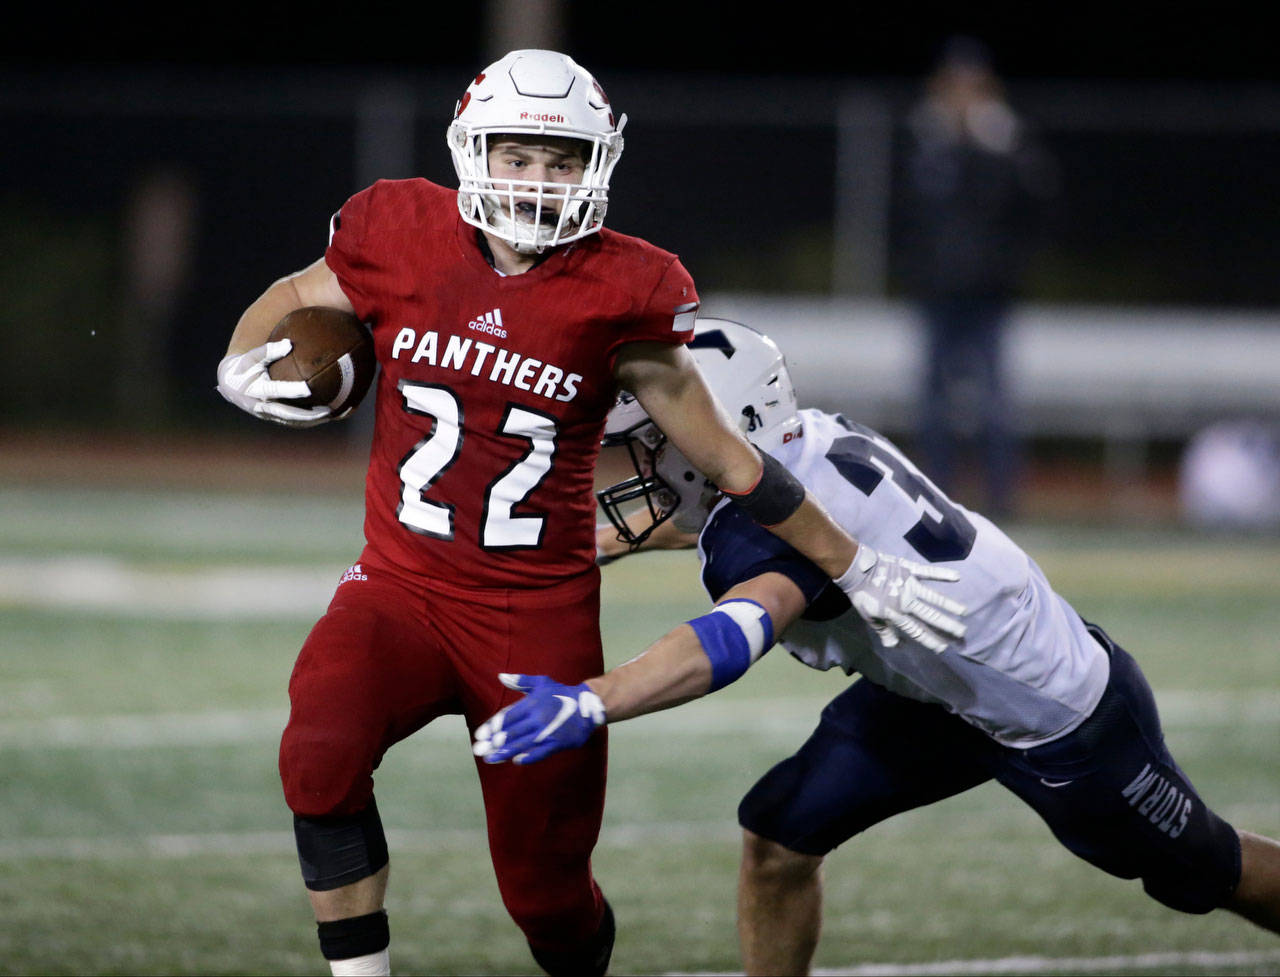 Snohomish running back Tyler Larson pushes off an opponent as he fights for yards in the Panthers’ 30-27 Squalicum victory on Friday night at Veterans Memorial Stadium in Snohomish. (Andy Bronson / The Herald)